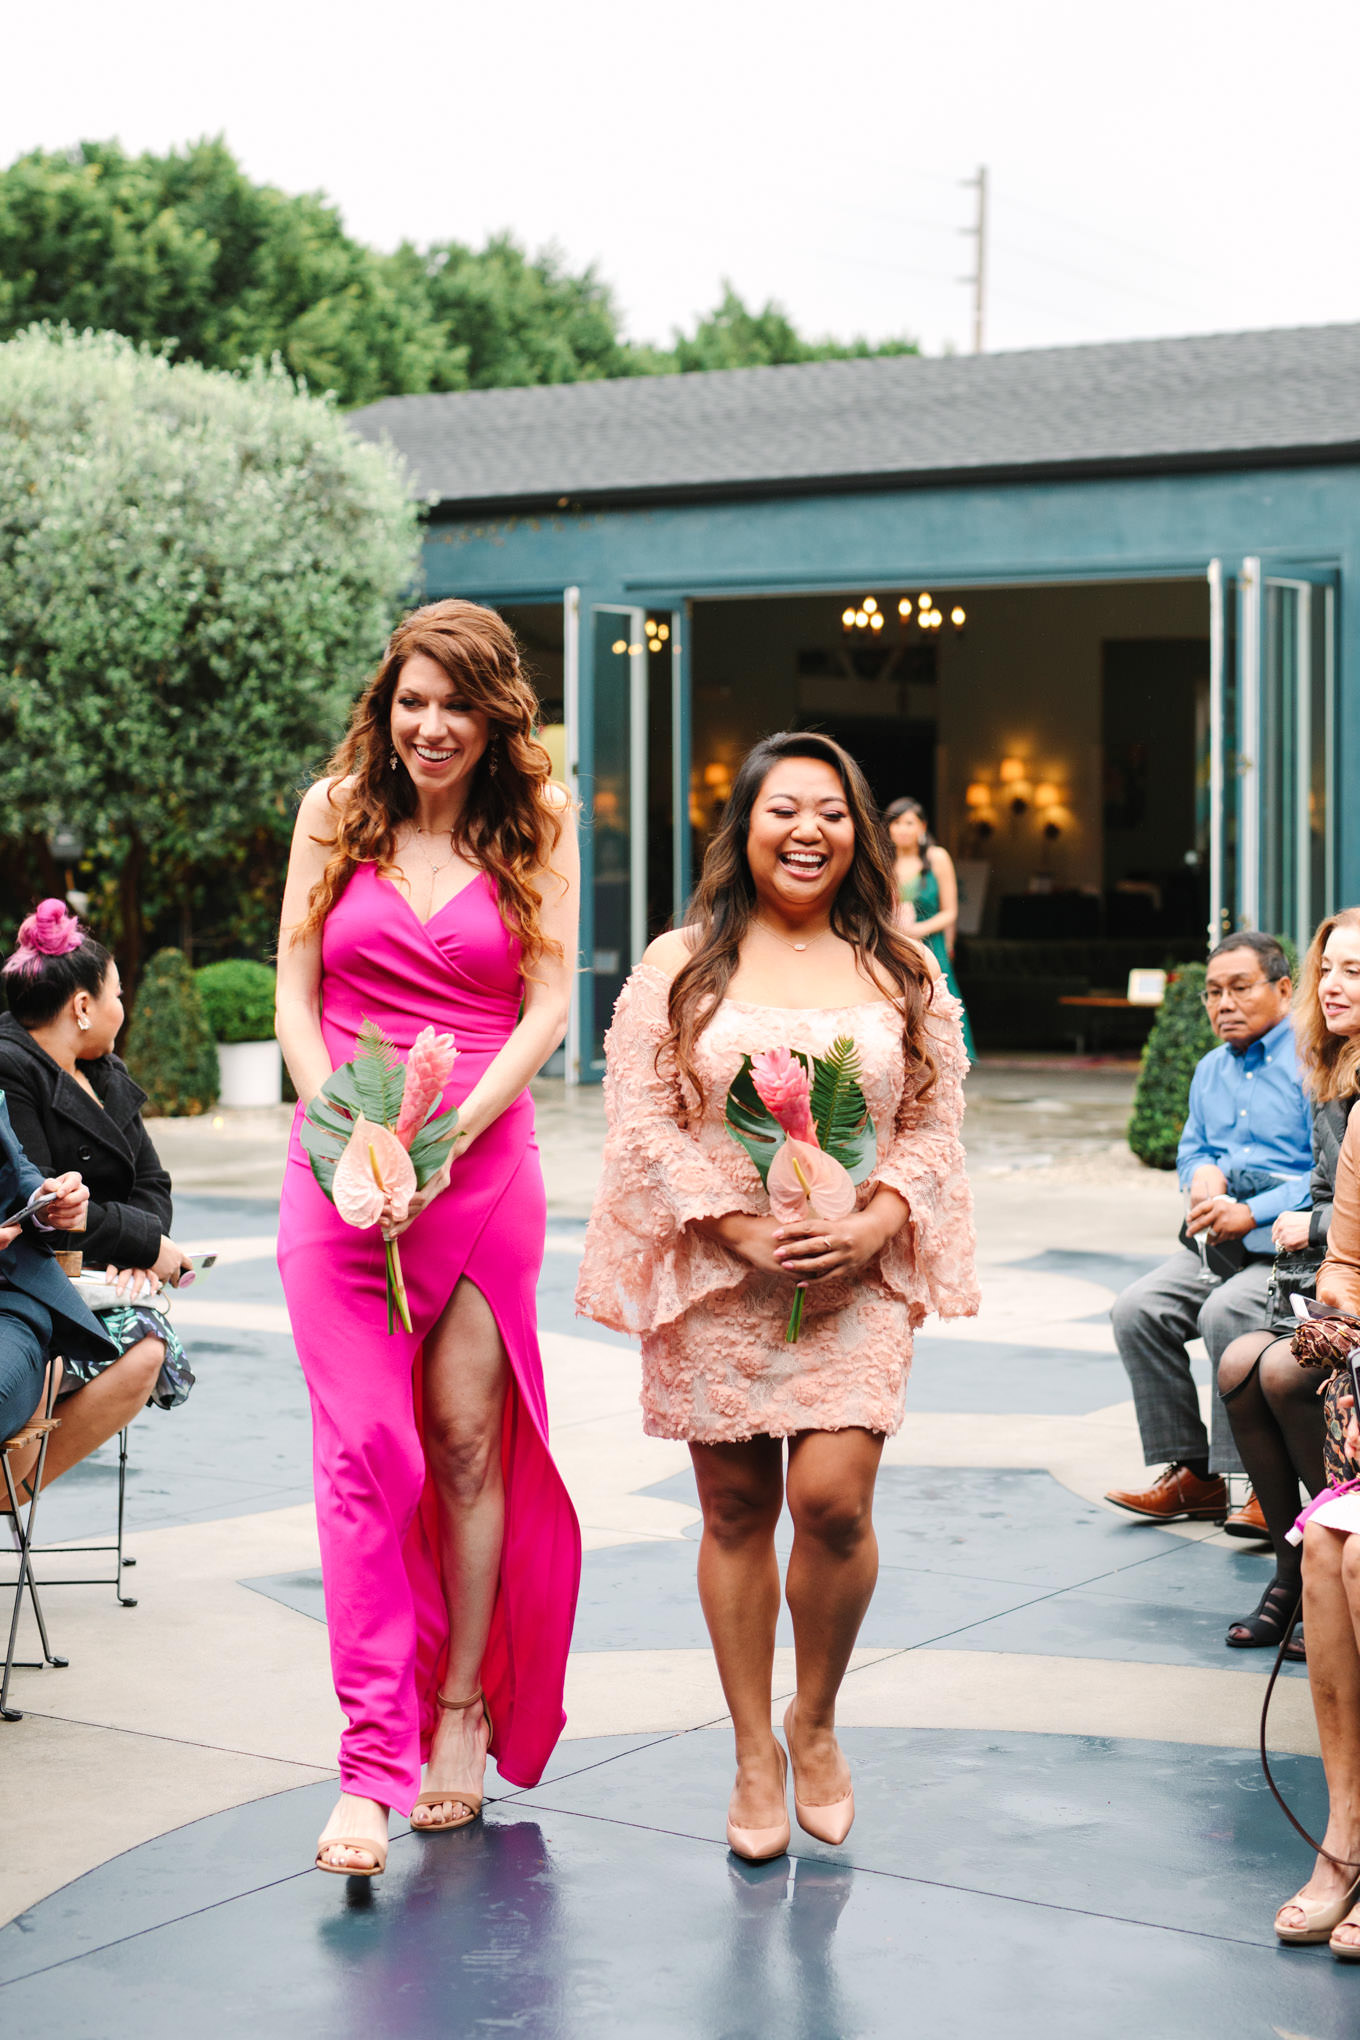 Bridesmaids walking into ceremony together | TV inspired wedding at The Fig House Los Angeles | Published on The Knot | Fresh and colorful photography for fun-loving couples in Southern California | #losangeleswedding #TVwedding #colorfulwedding #theknot   Source: Mary Costa Photography | Los Angeles wedding photographer